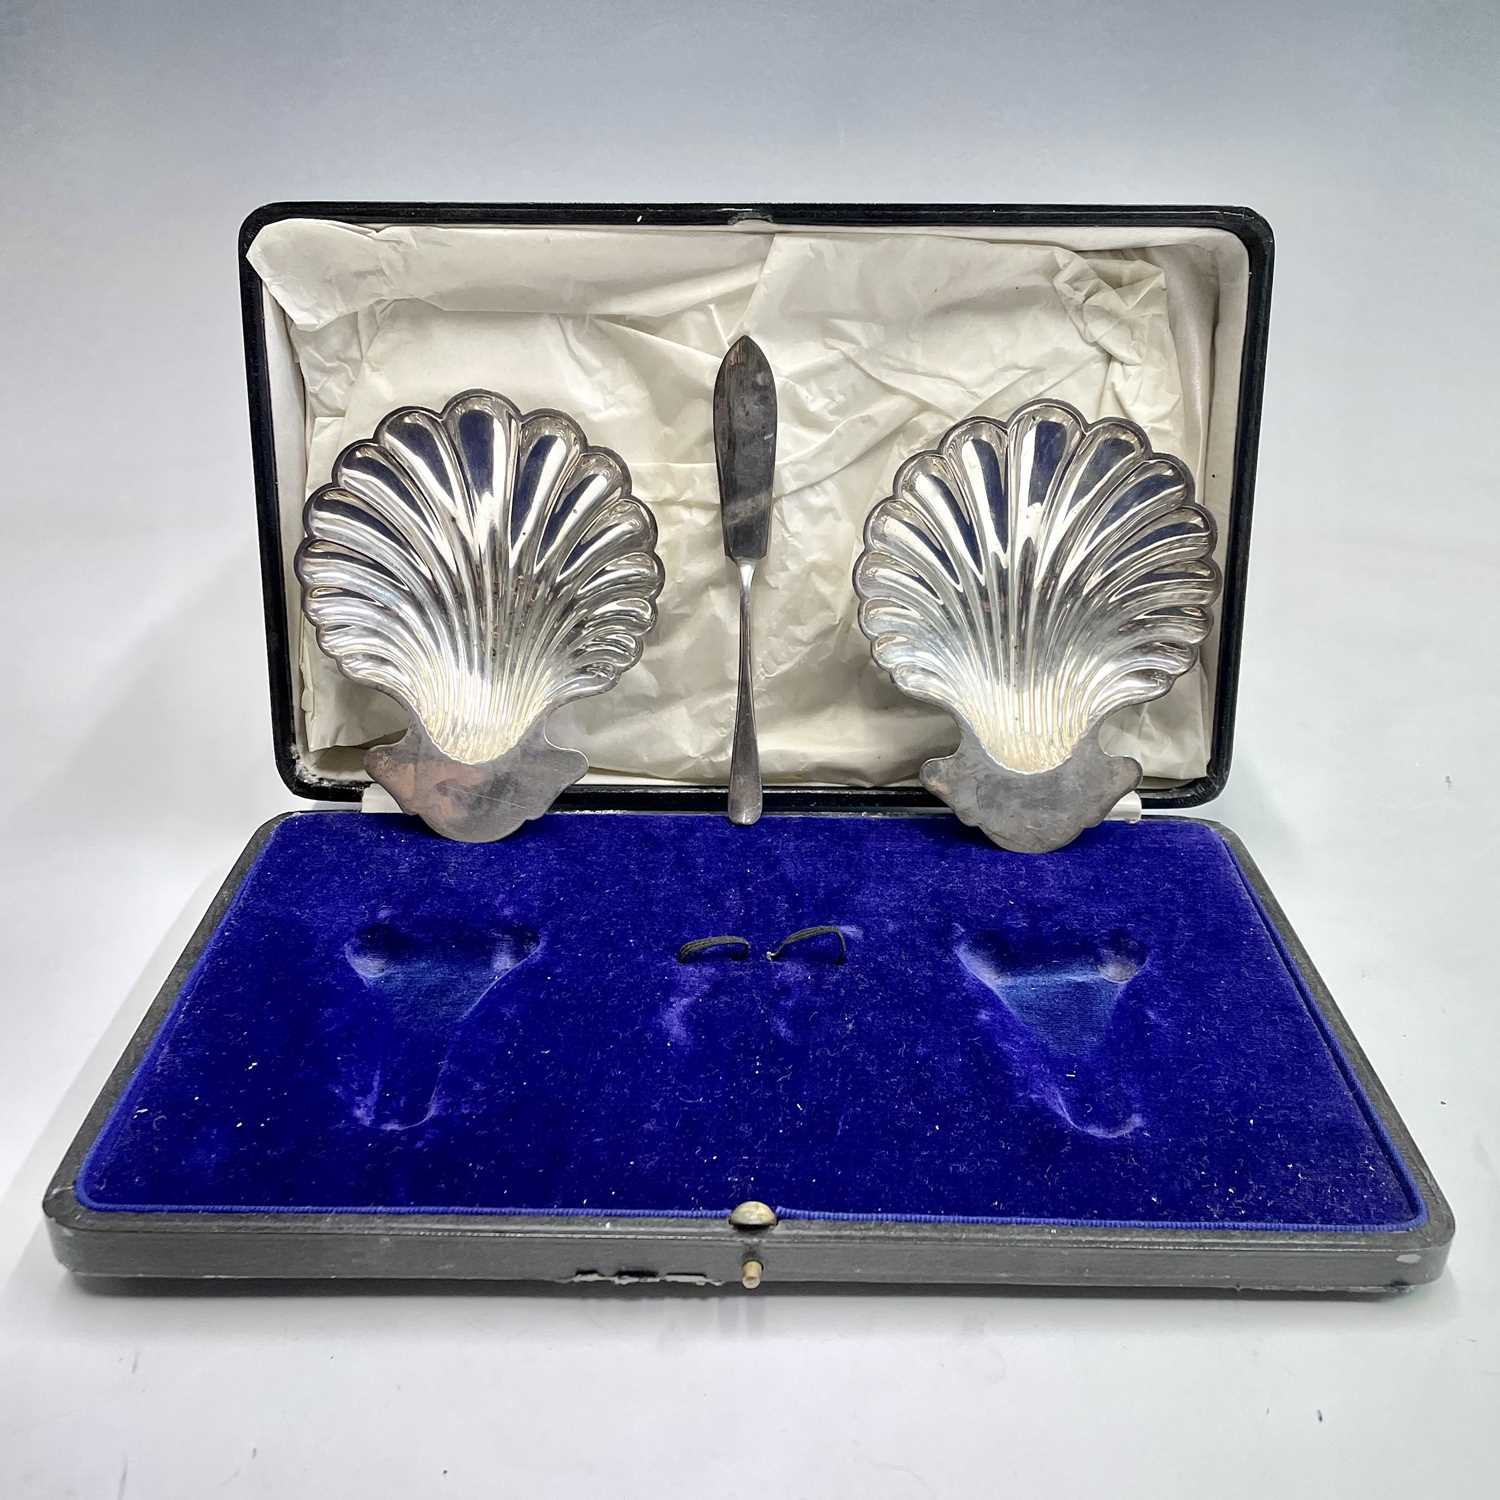 A George V cased pair of scallop shell butter dishes by Elkington & Co, together with one butter